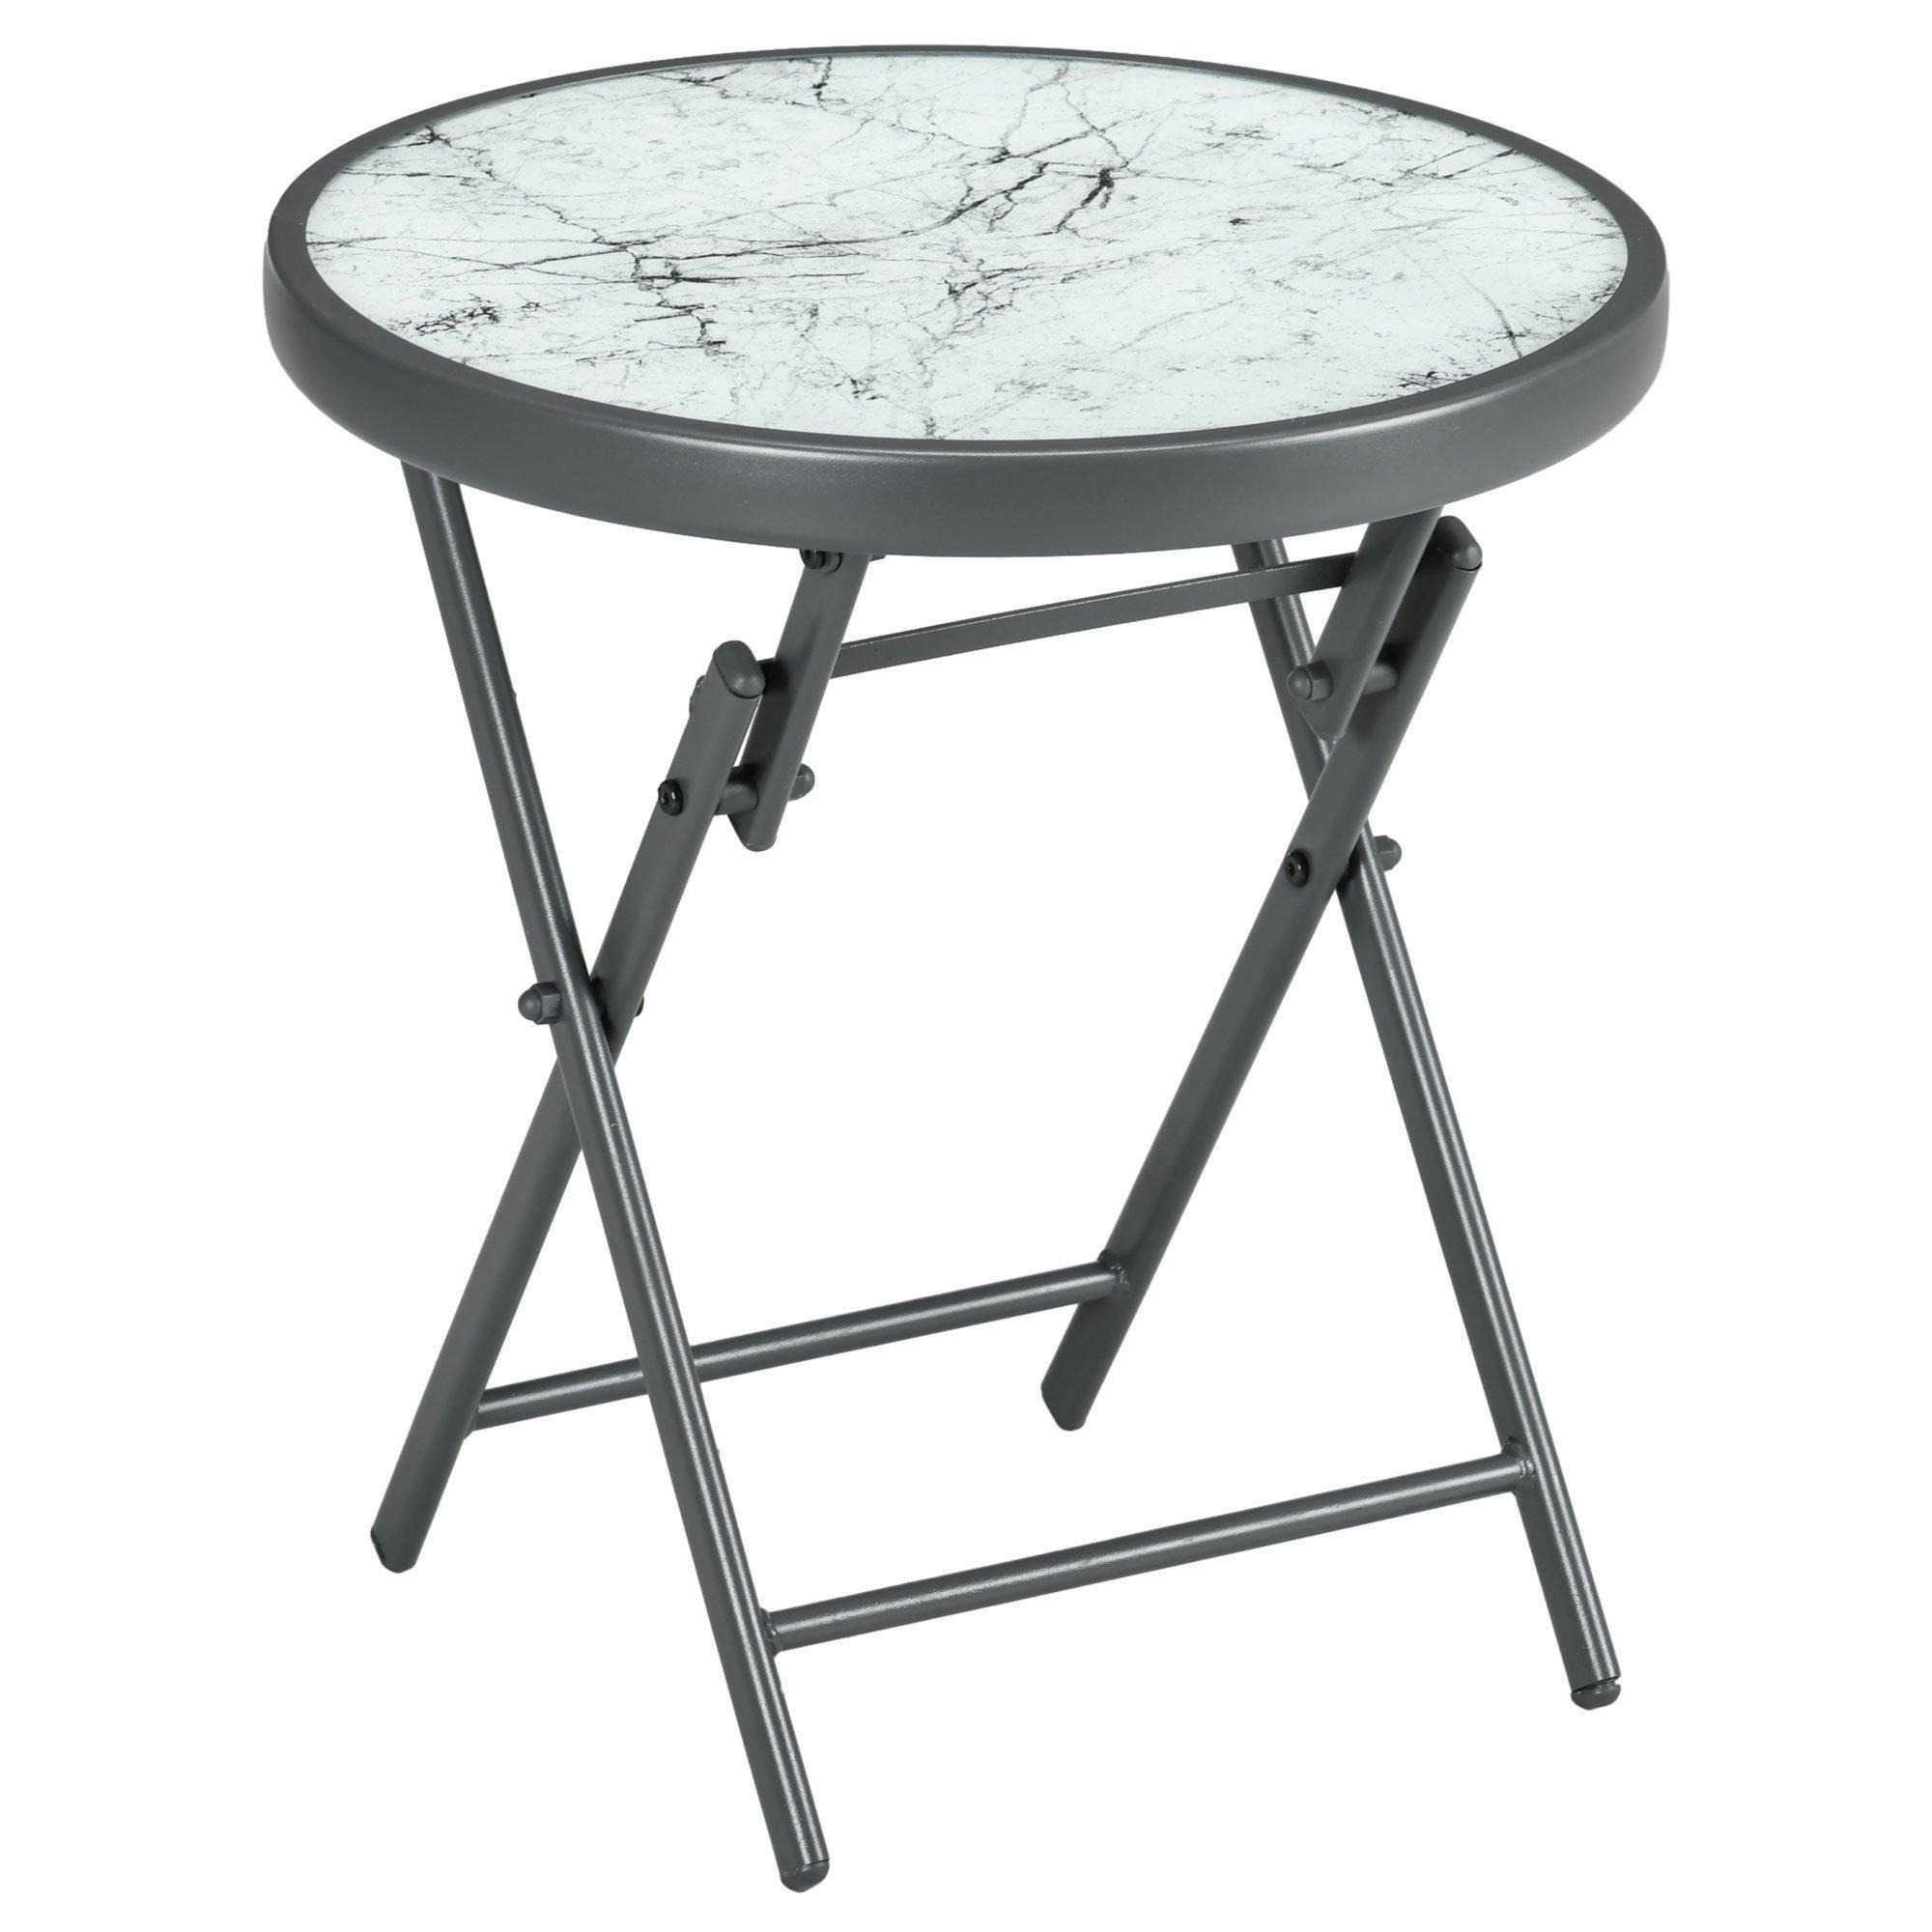 Round Folding Side Table Patio Table w/ Imitation Marble Glass Top - image 1